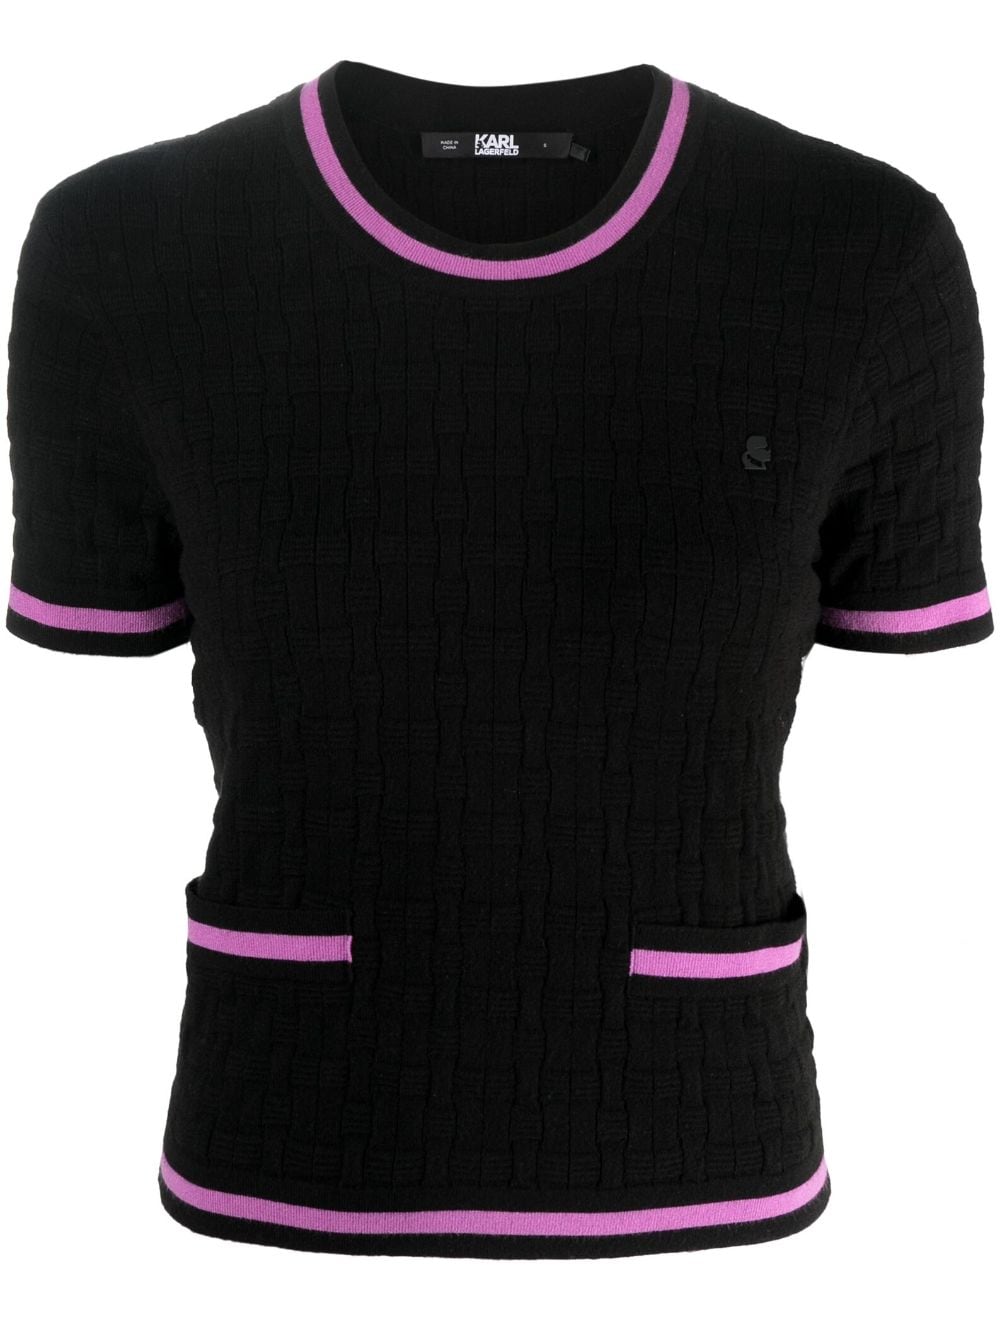 Image 1 of Karl Lagerfeld contrast-trim knitted top